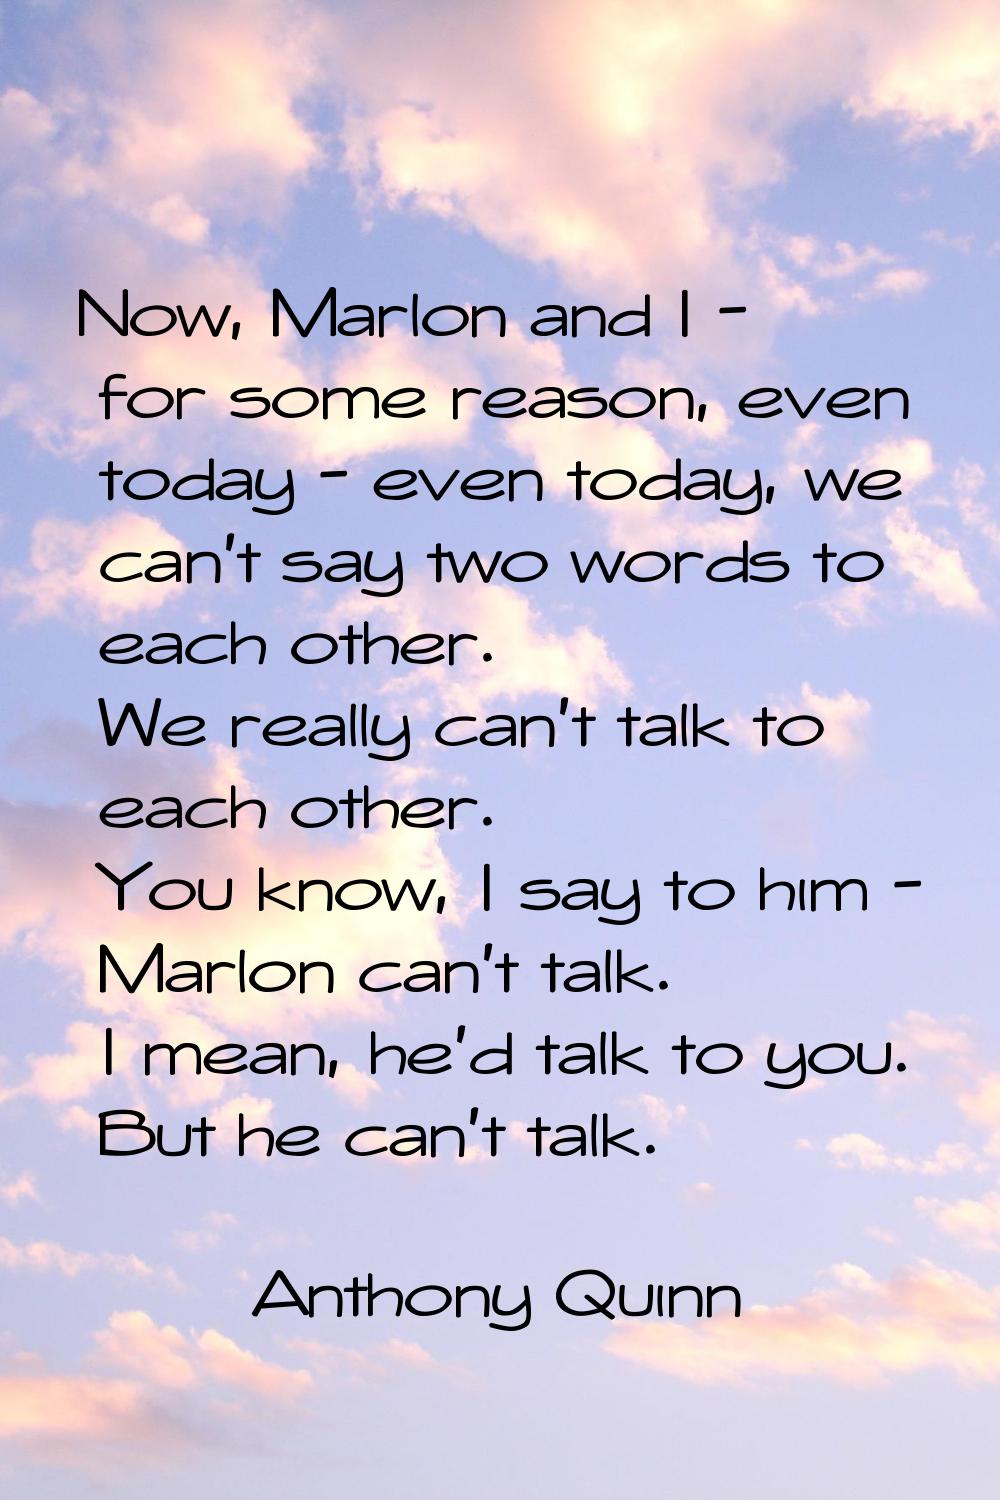 Now, Marlon and I - for some reason, even today - even today, we can't say two words to each other.